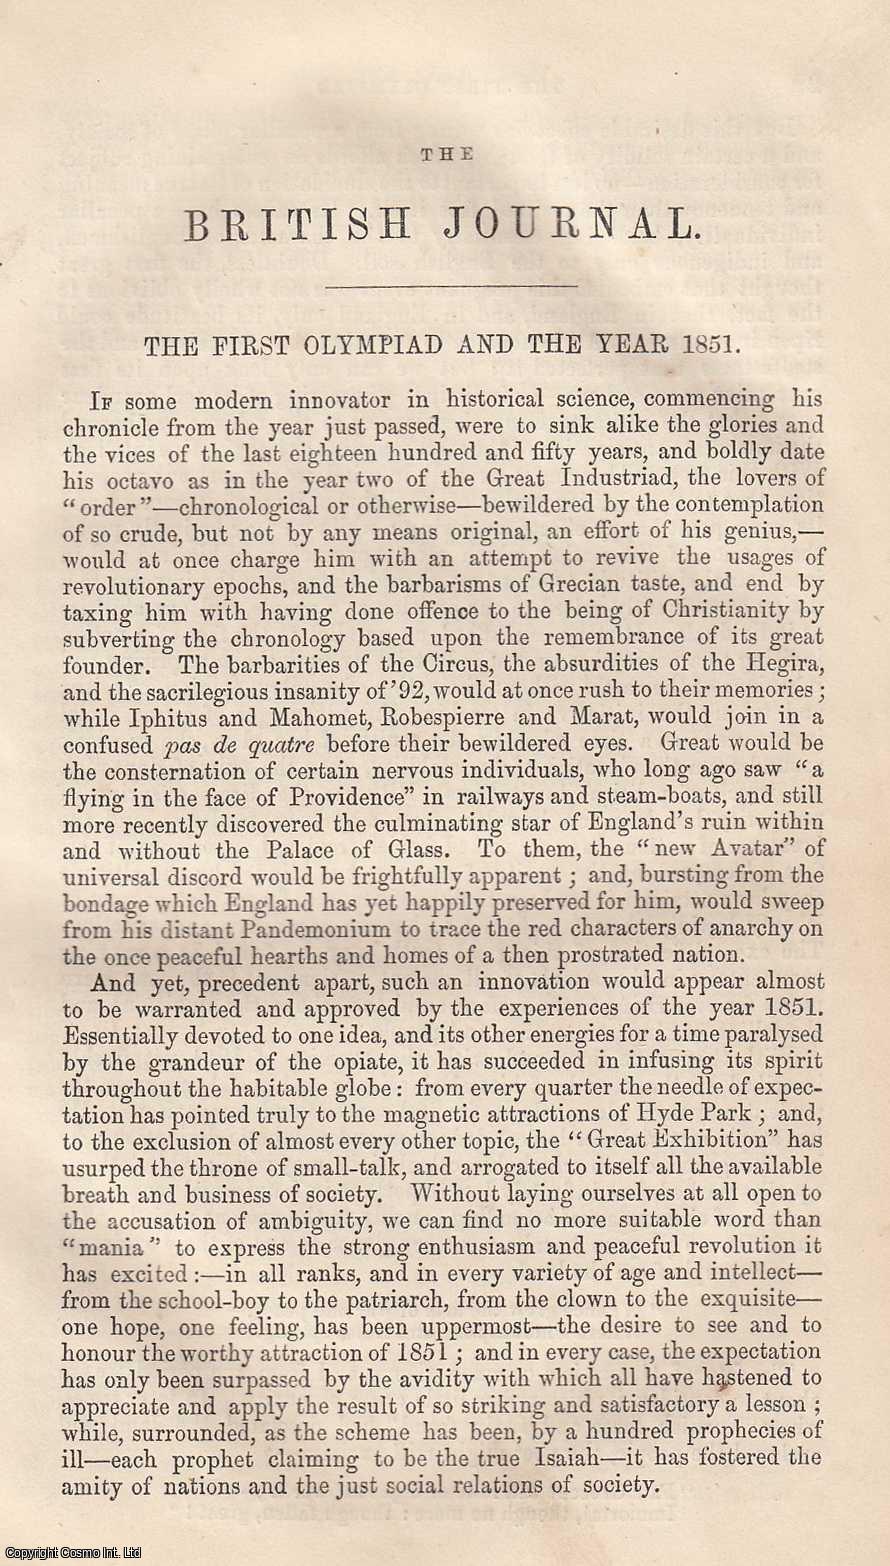 No Author Stated - The First Olympiad and the Year 1851. An original article from The British Journal, 1852.